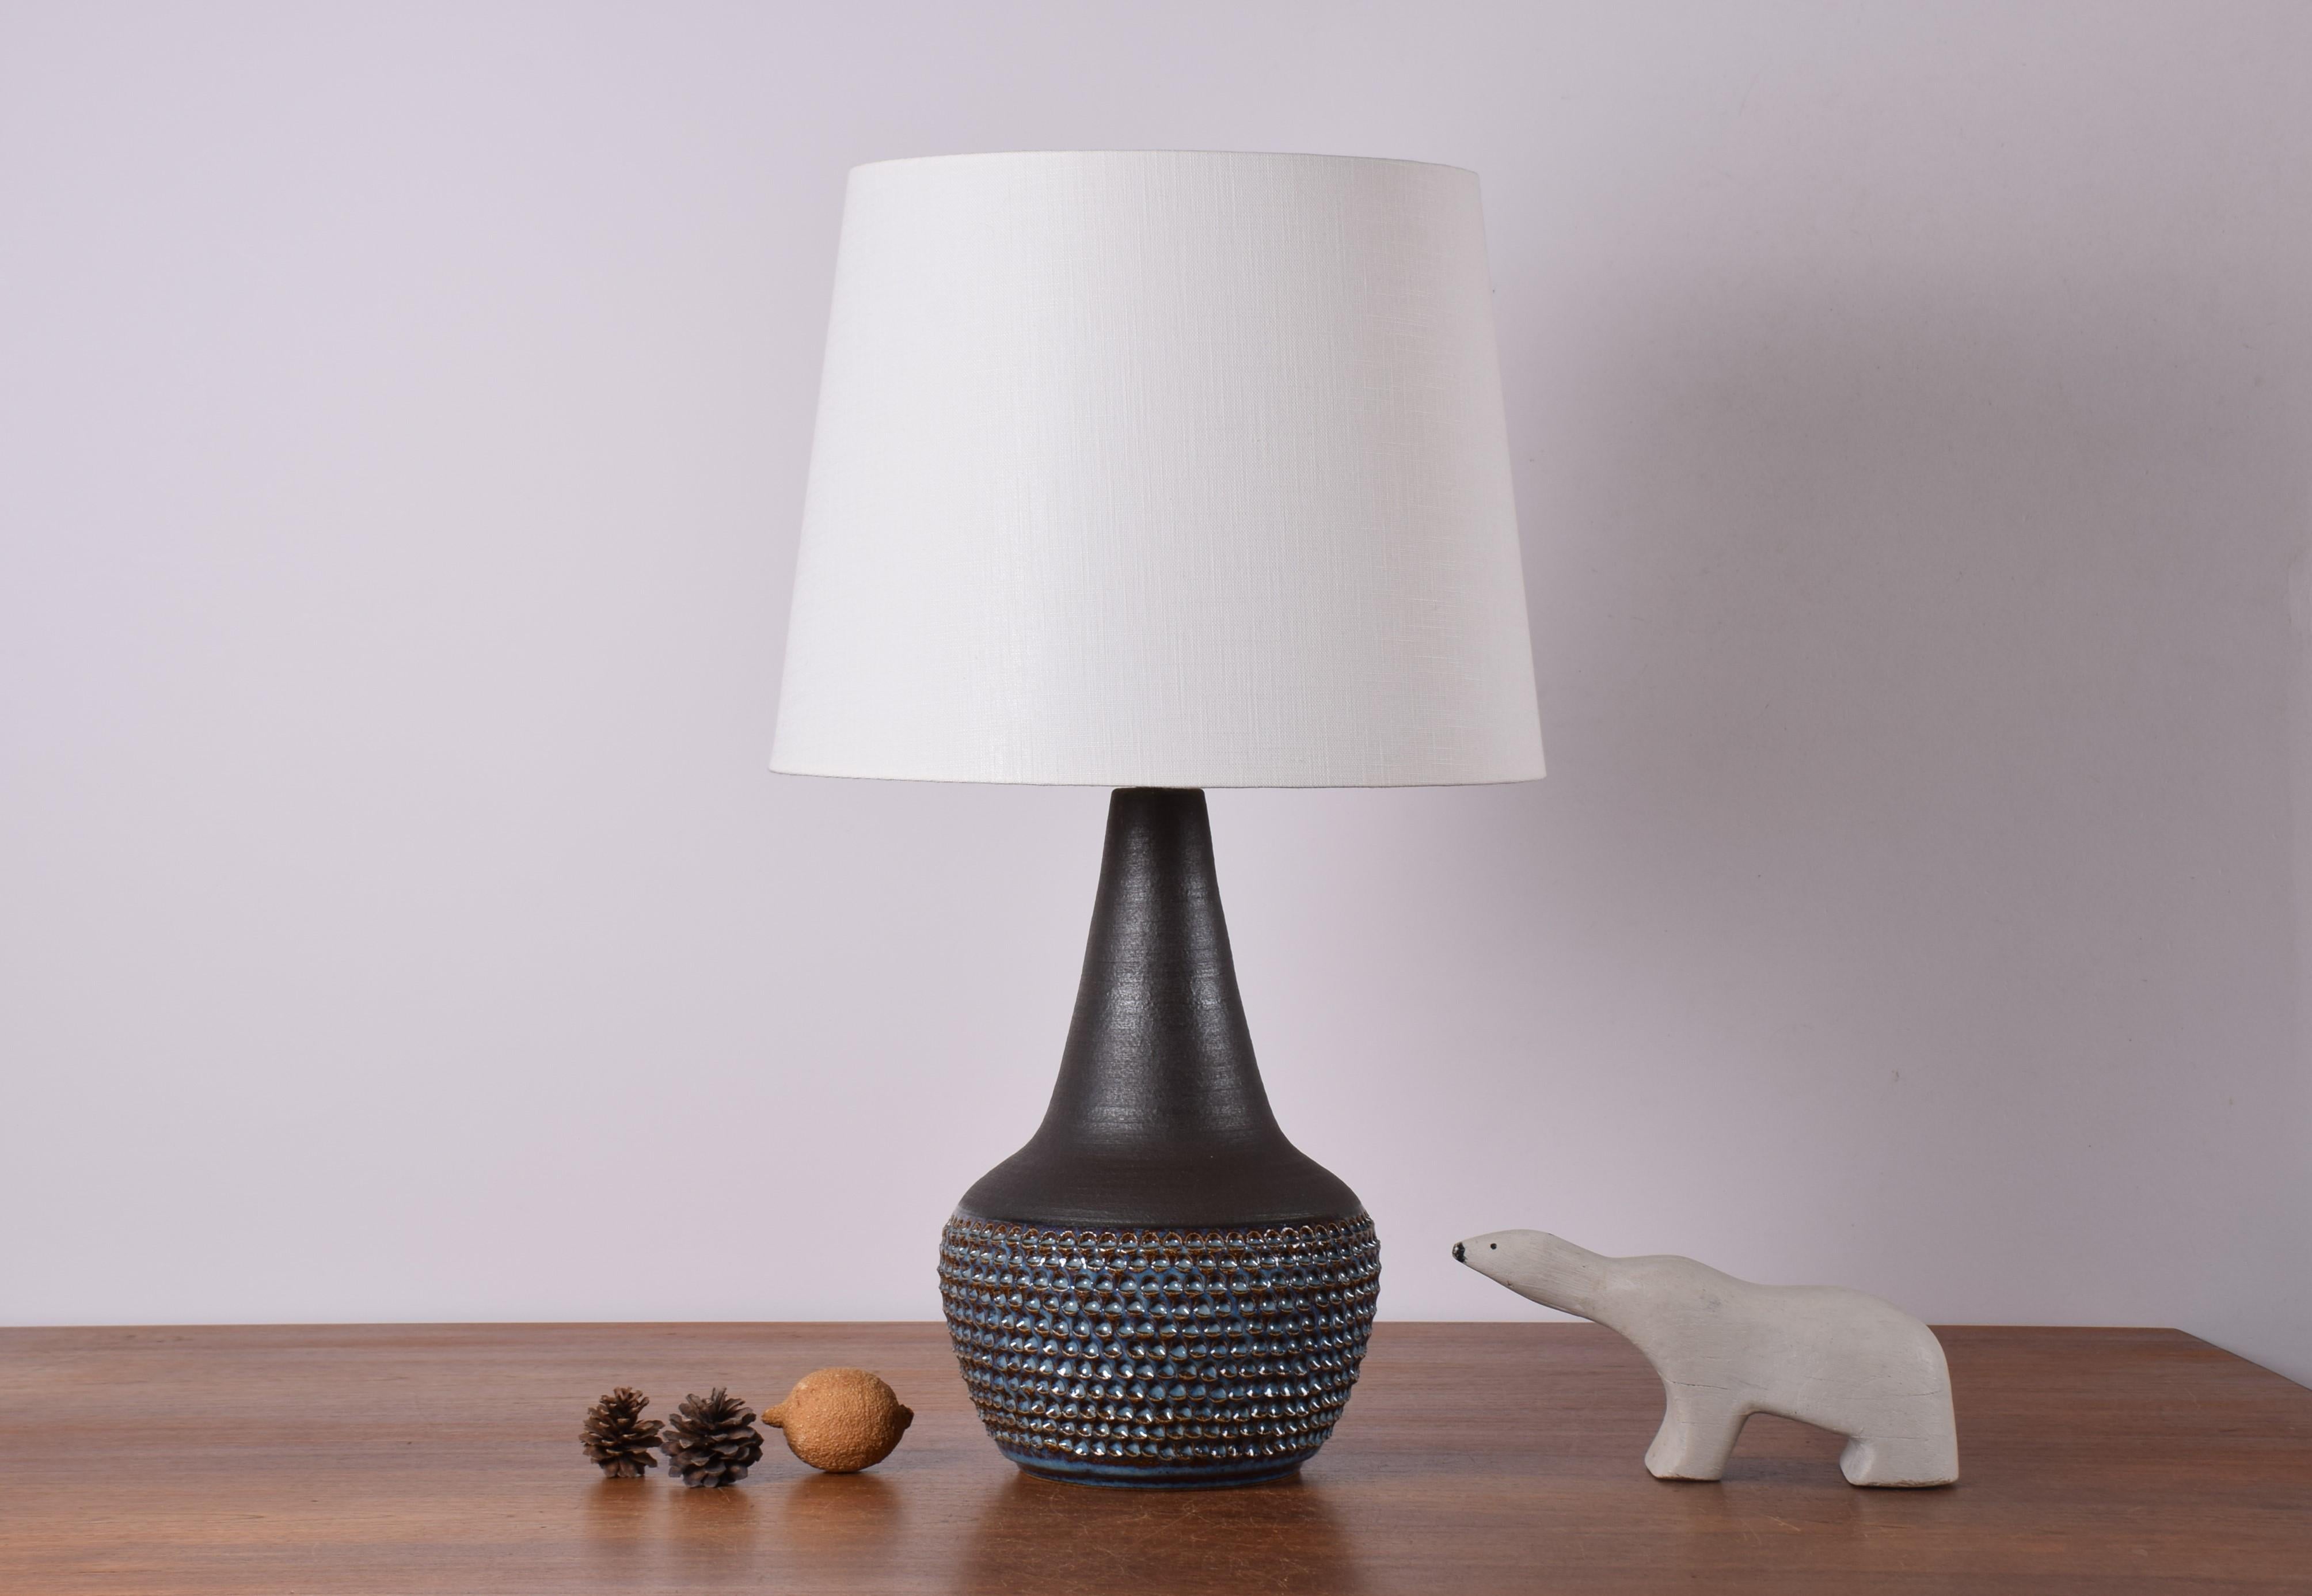 Midcentury tall budded table lamp designed by Einar Johansen for Danish stoneware manufacturer Søholm. Produced circa 1960s.

The lamp has a dark matte brown glaze on neck and shoulder contrasted by a textured surface and glossy bluish glaze on